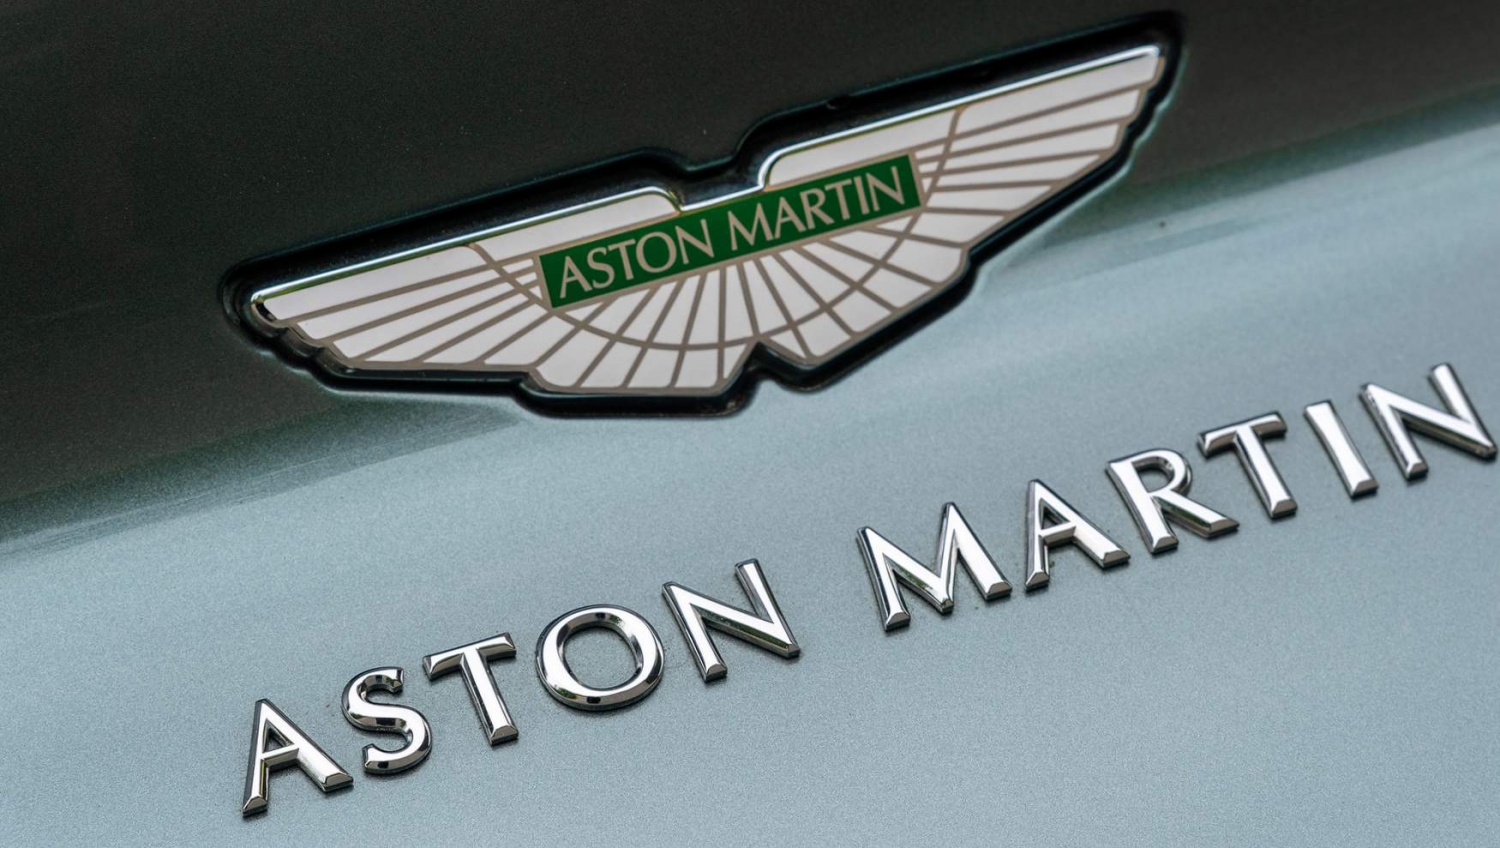 Racing Point F 1 team to become Aston Martin from 2021 after Stroll buy-in